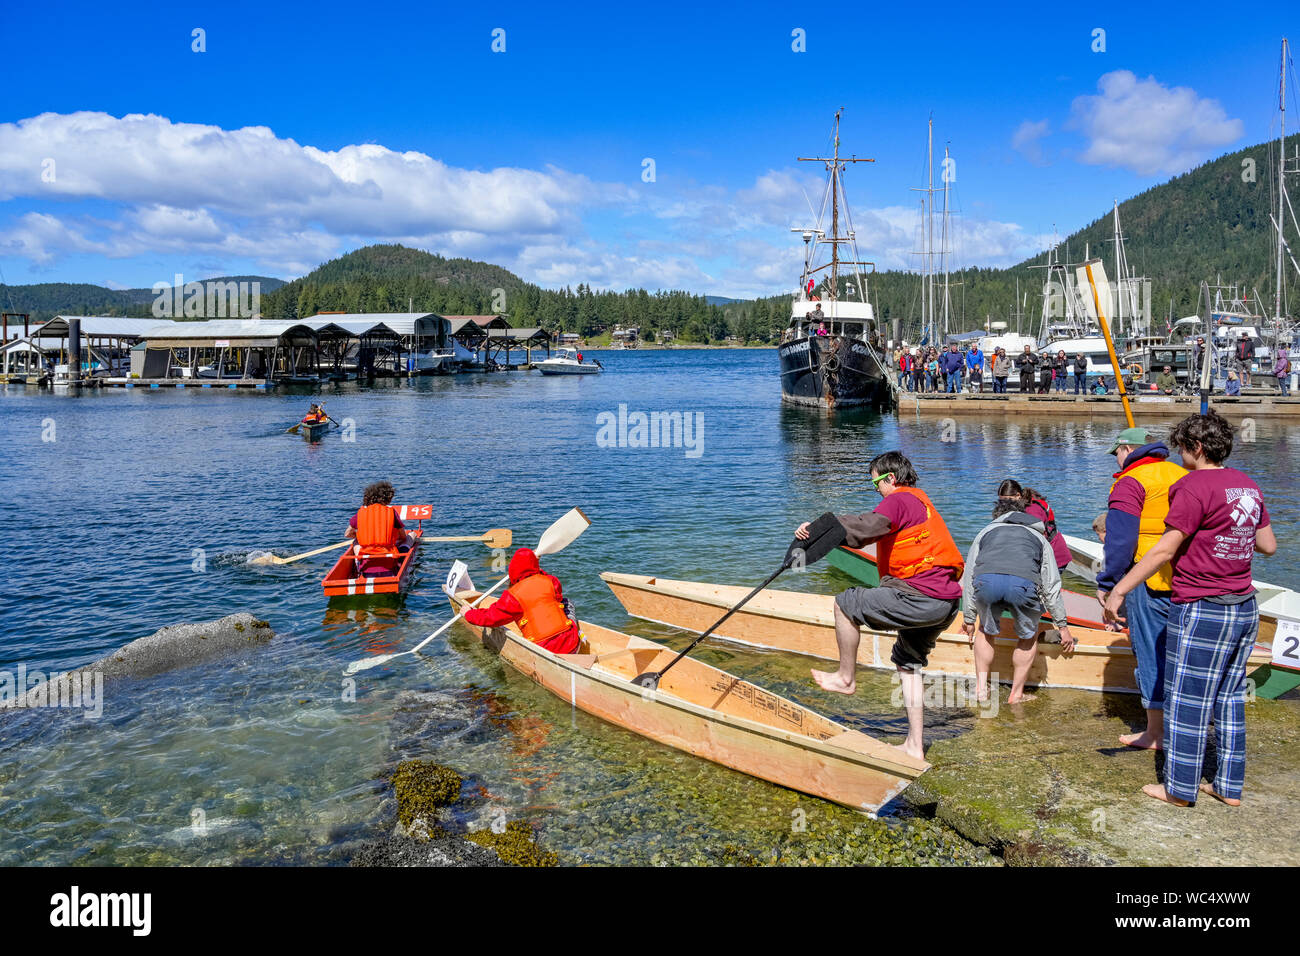 Youth race, April Tools Wooden Boat Challenge, Pender Harbour